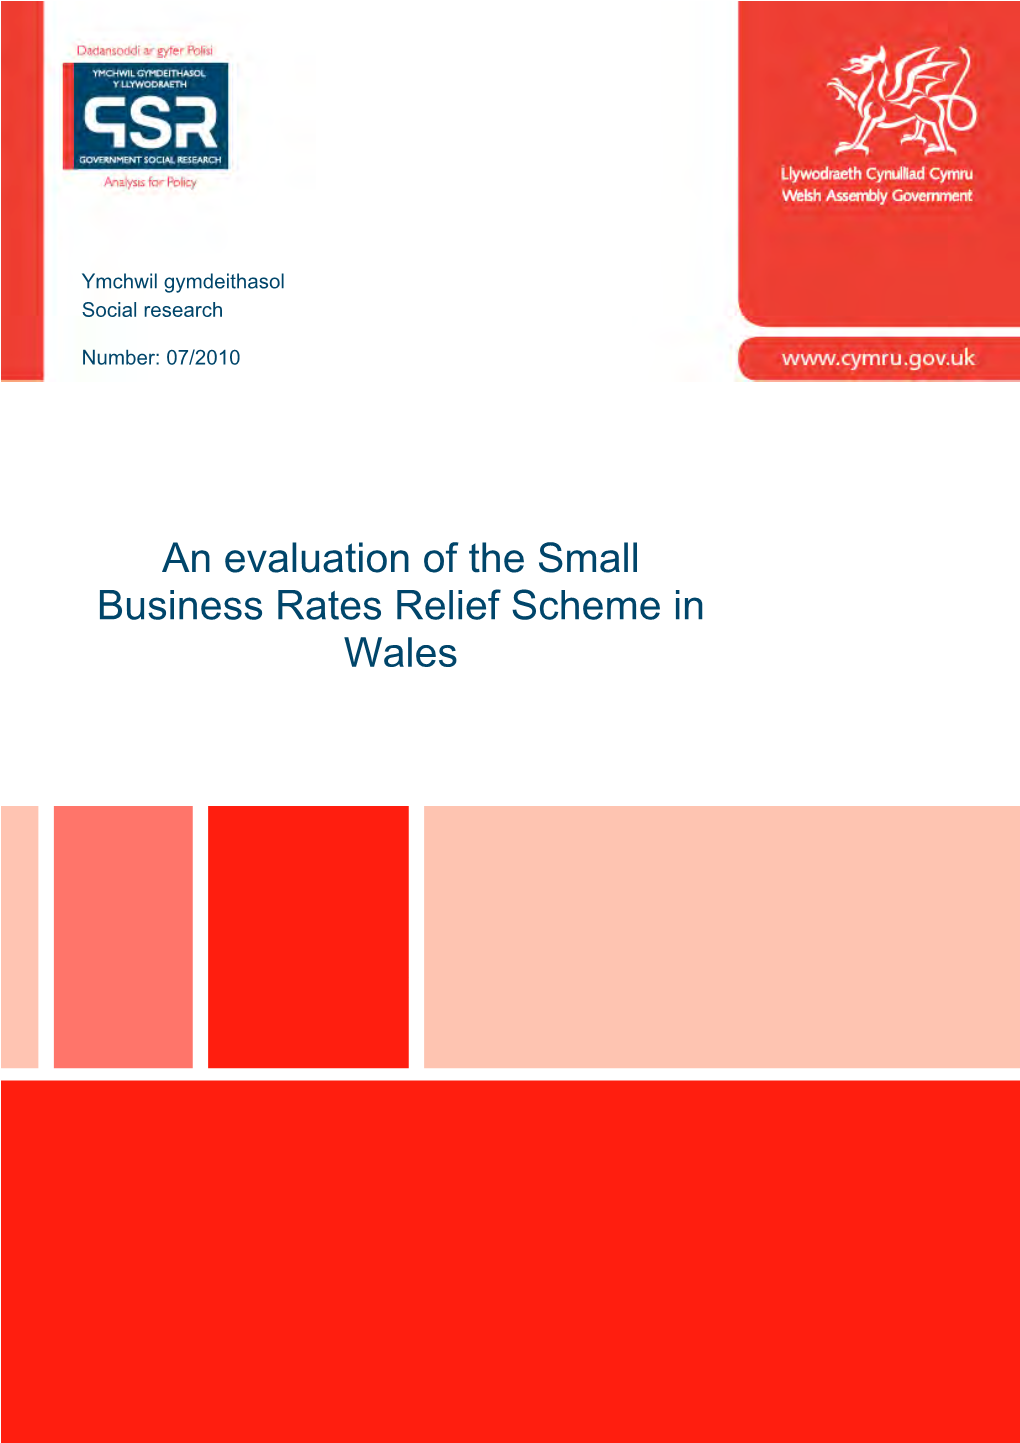 An Evaluation of the Small Business Rates Relief Scheme in Wales